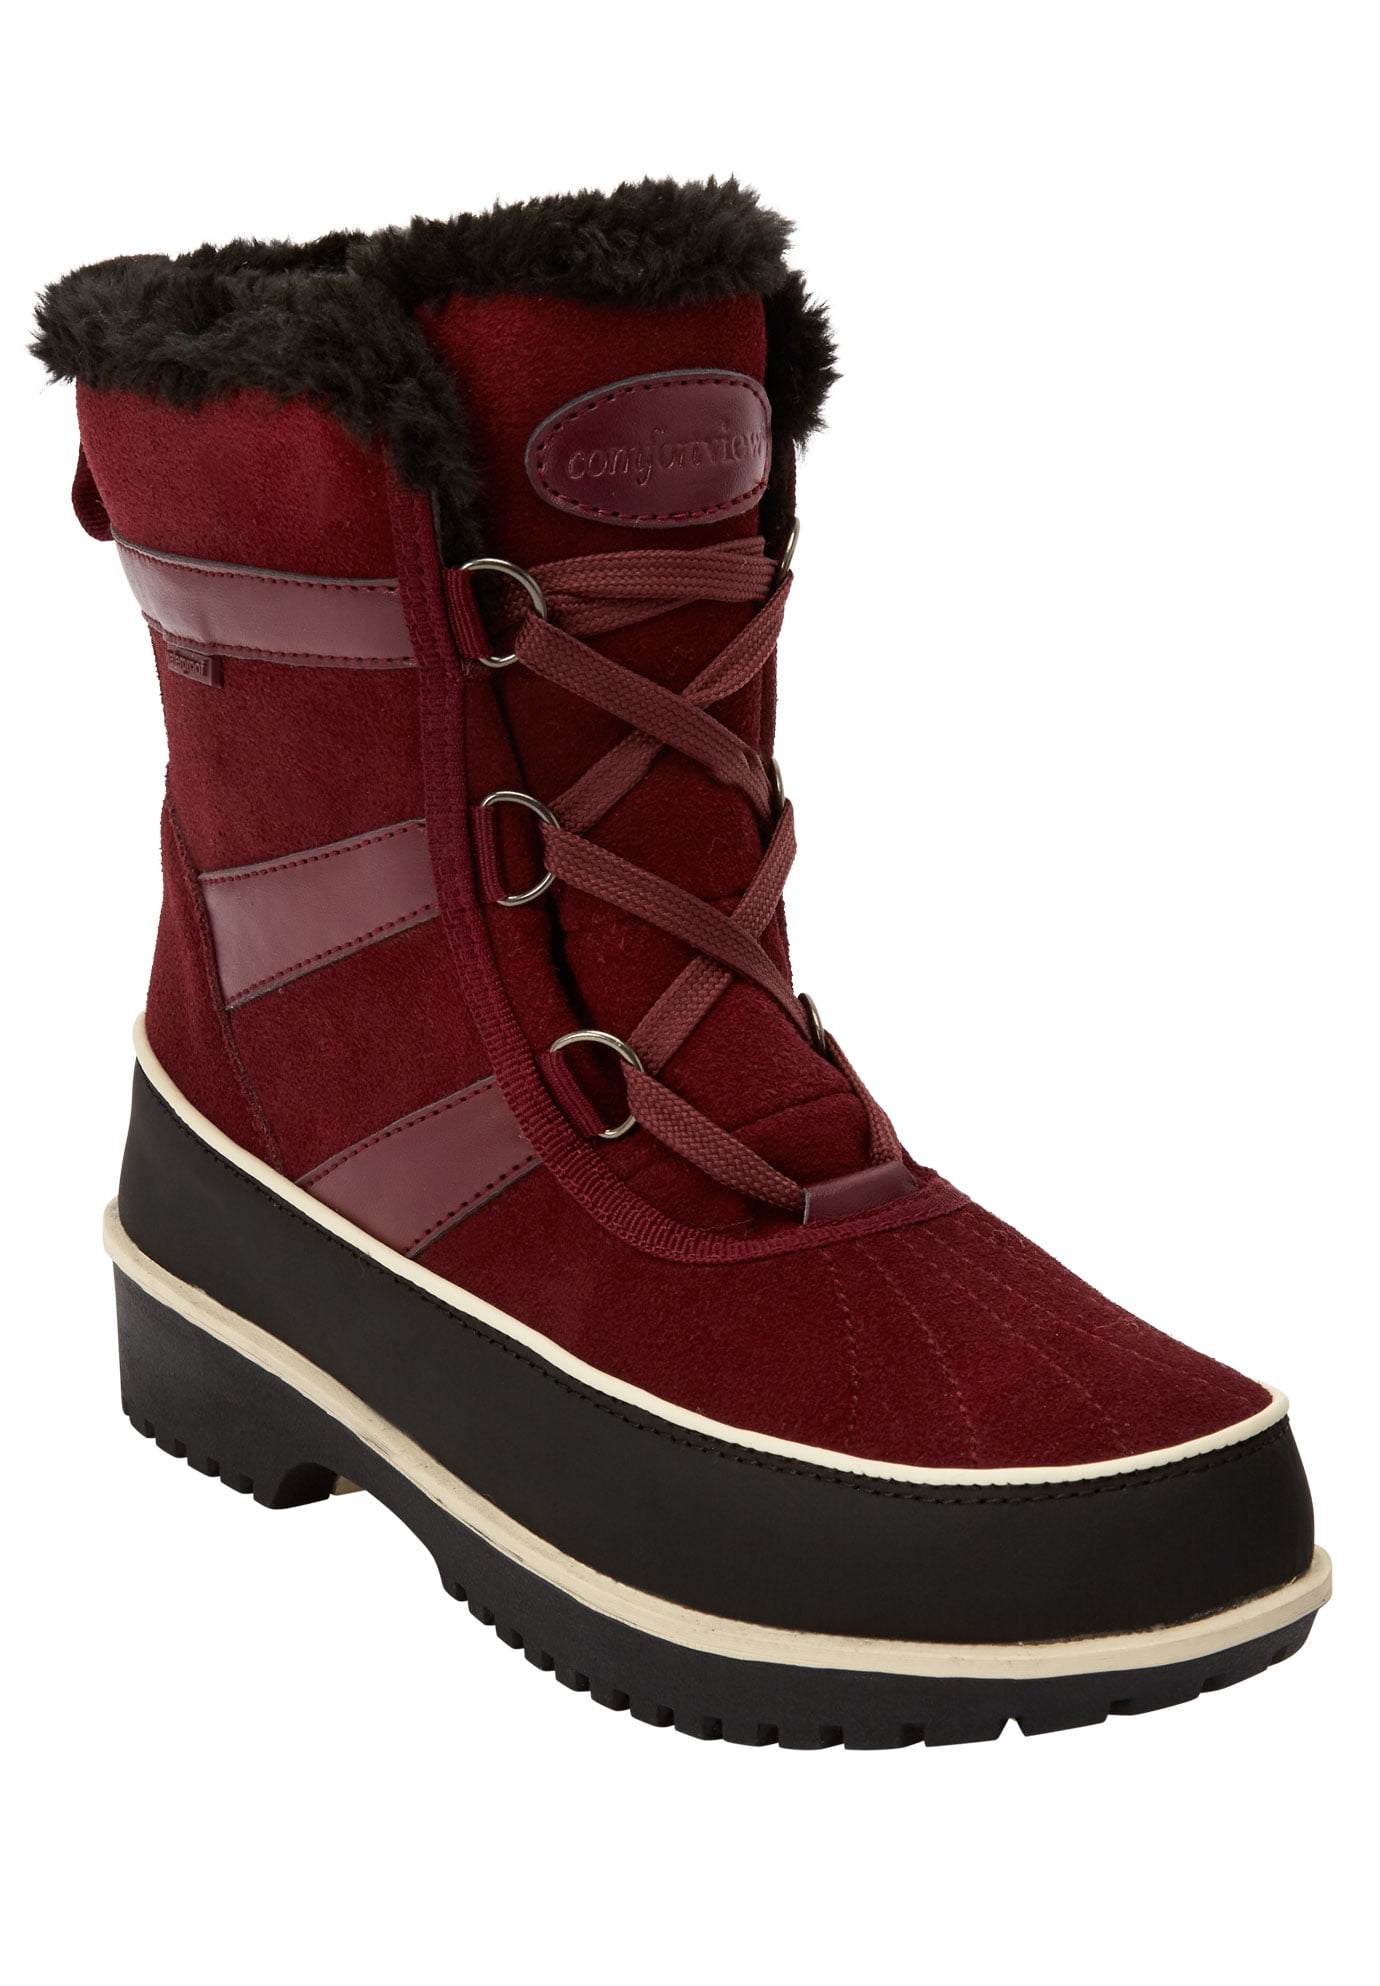 4e Wide Winter Boots Save Up To 16